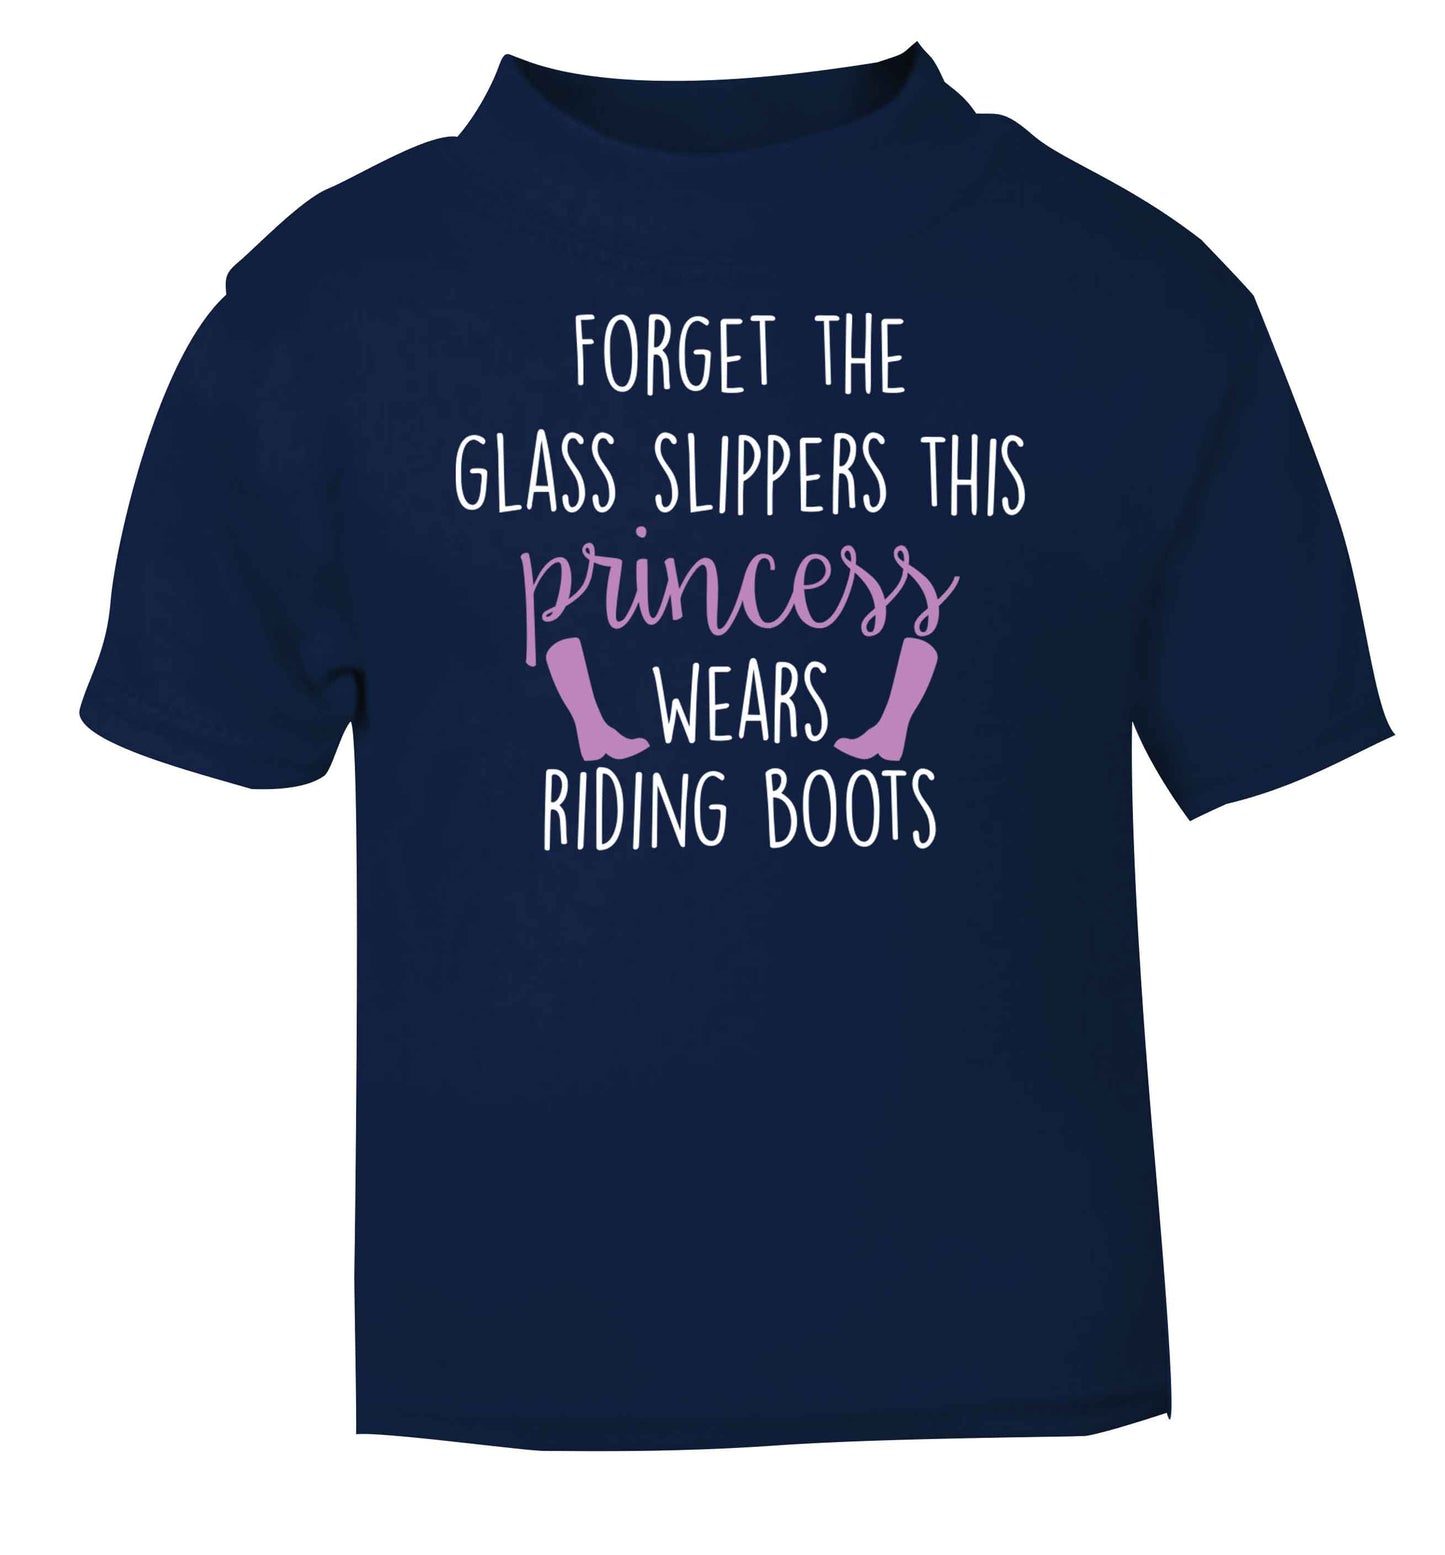 Forget the glass slippers this princess wears riding boots navy baby toddler Tshirt 2 Years